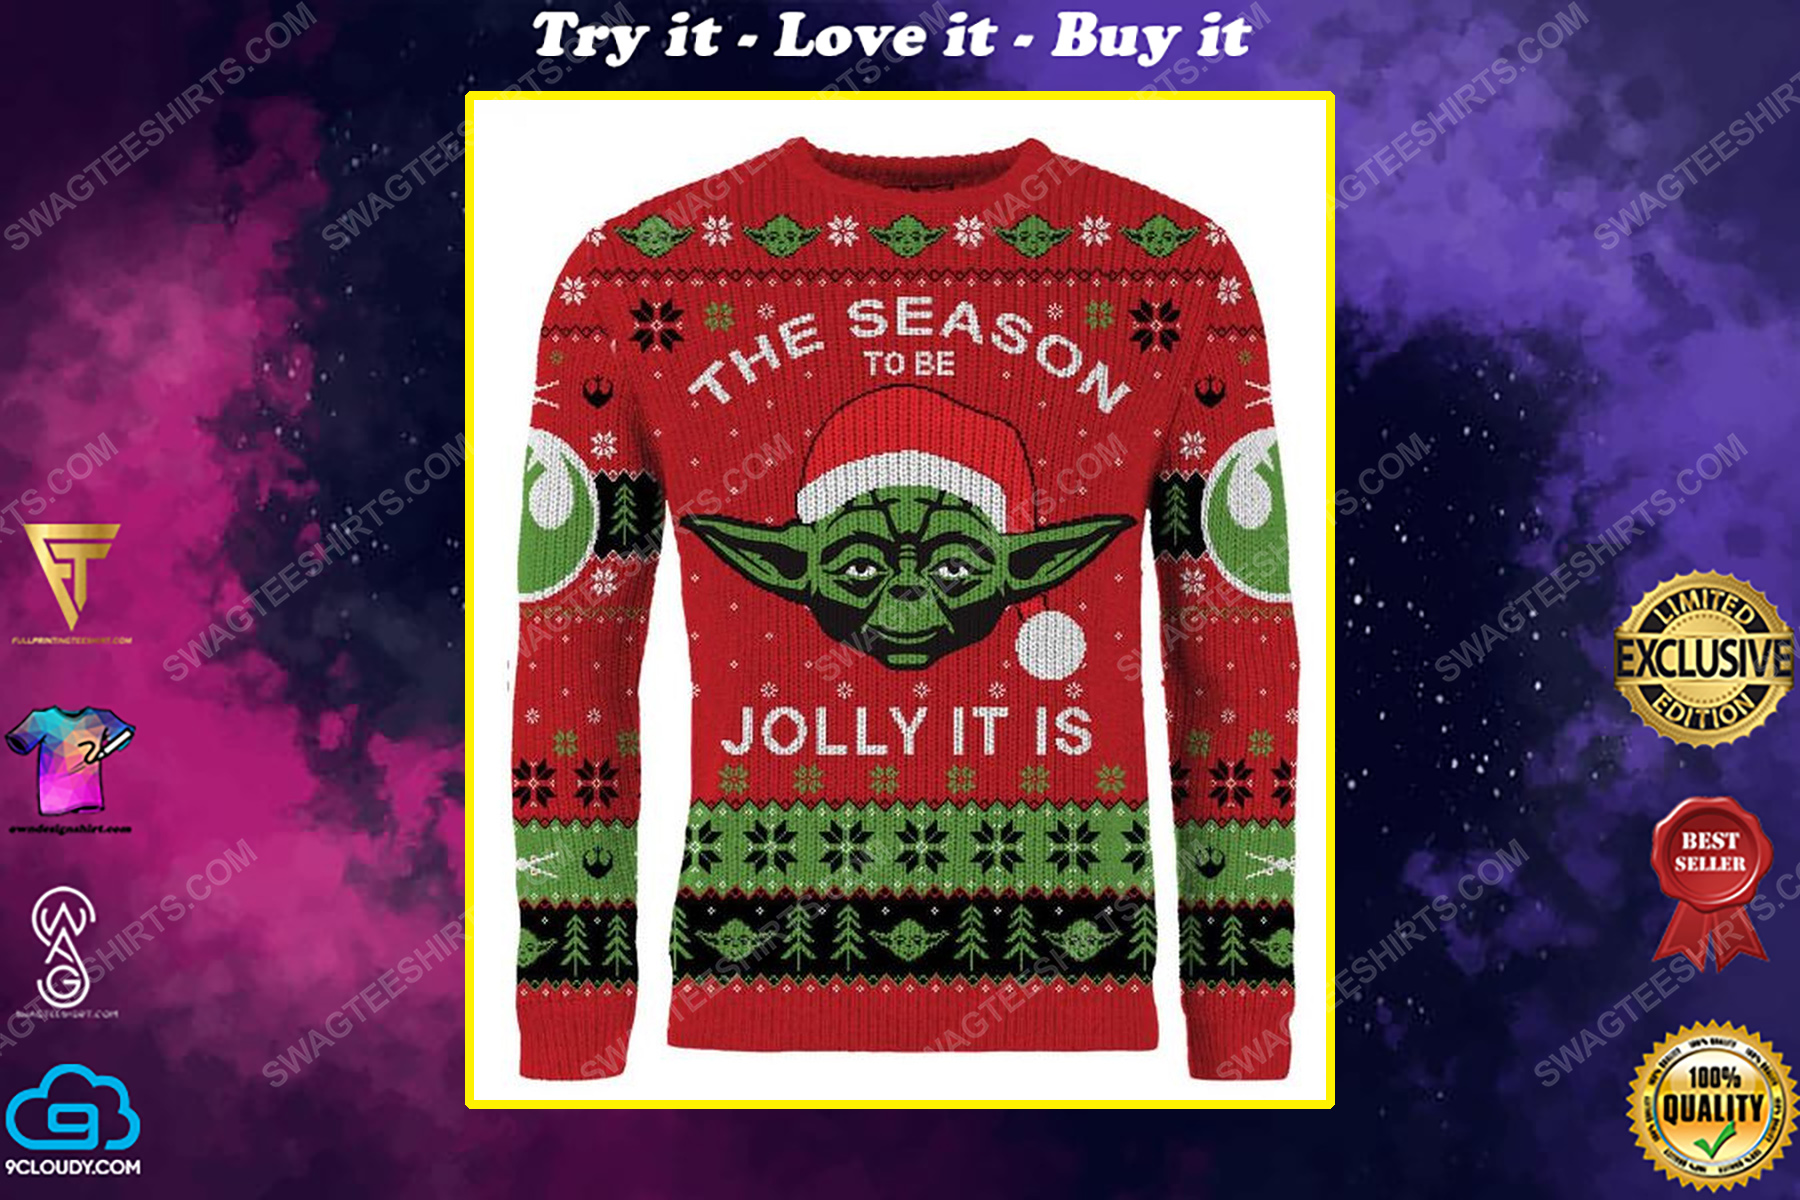 Star wars the season to be jolly it is full print ugly christmas sweater